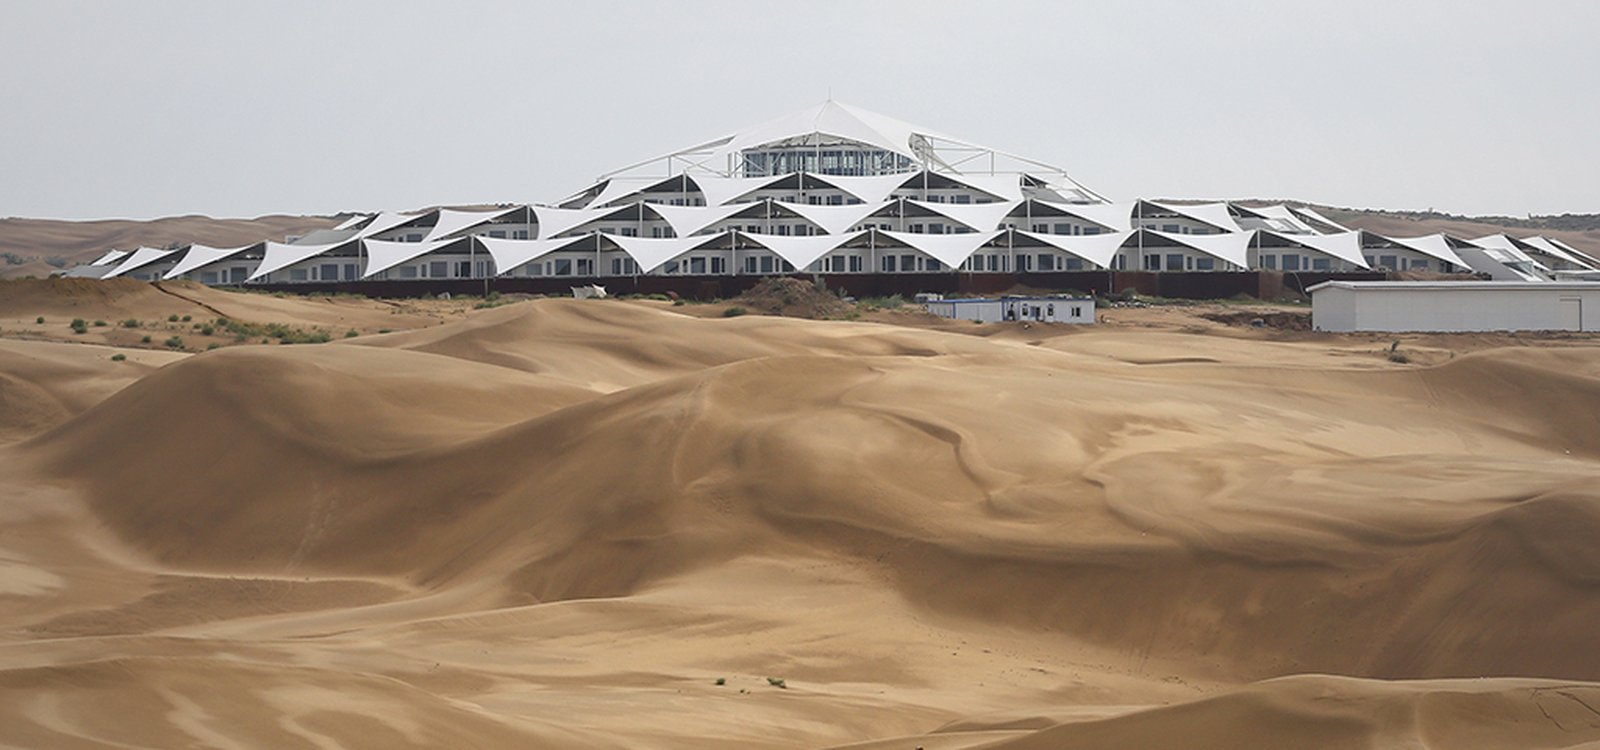 <p>The hotel sits in the middle of the desert, but close to China’s rare earth miners.</p>
